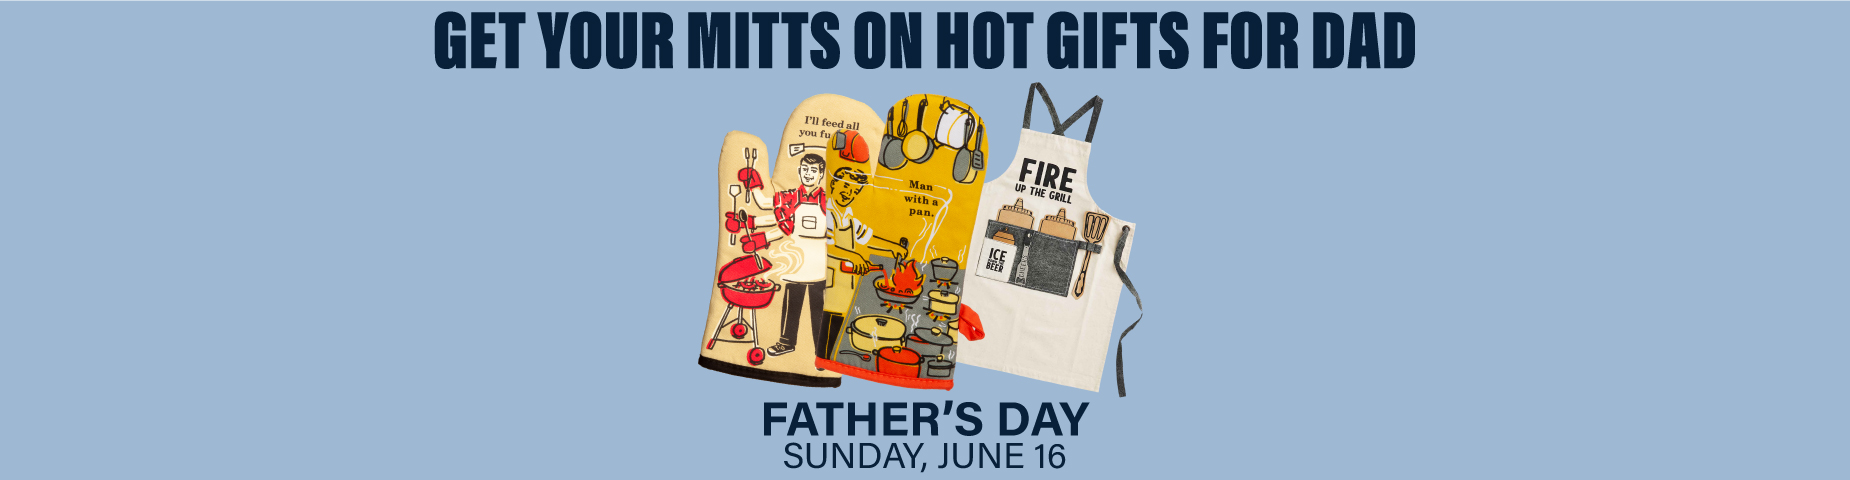 GET YOUR MITTS ON HOT GIFTS FOR DAD: Father's Day, Sun. June 16